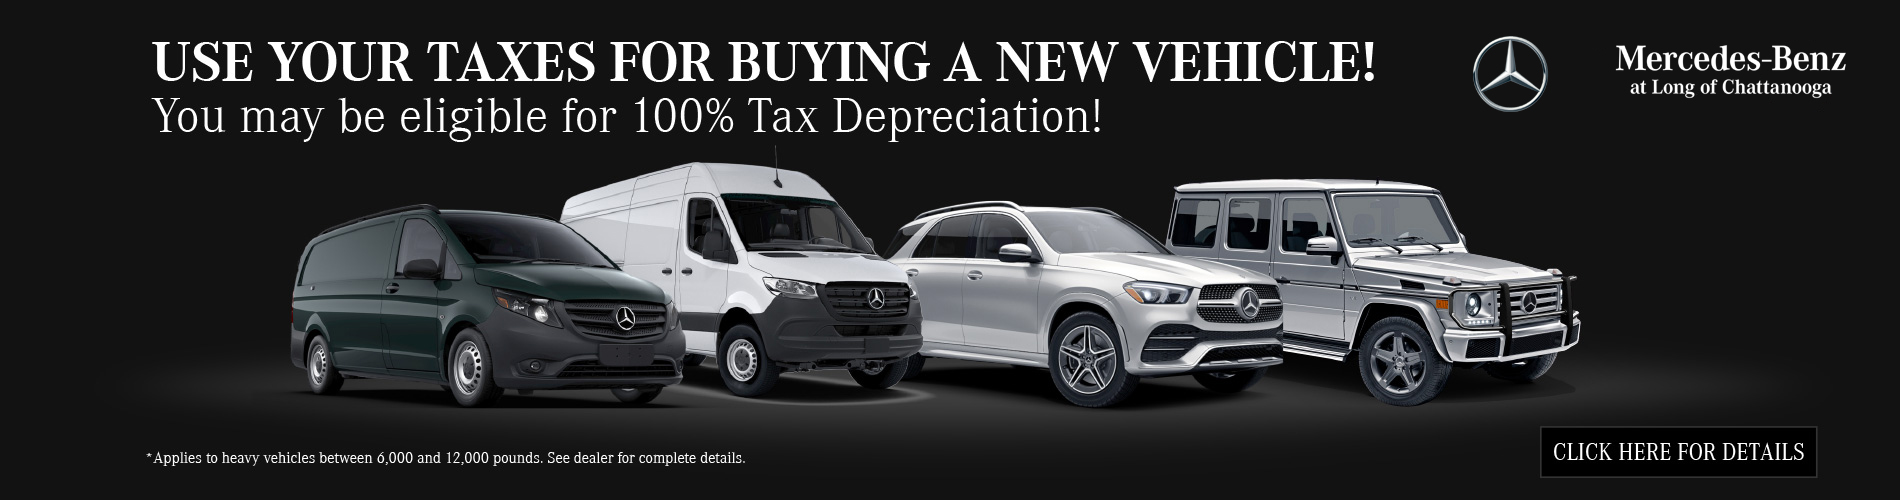 Use your taxes to buy new vehicle